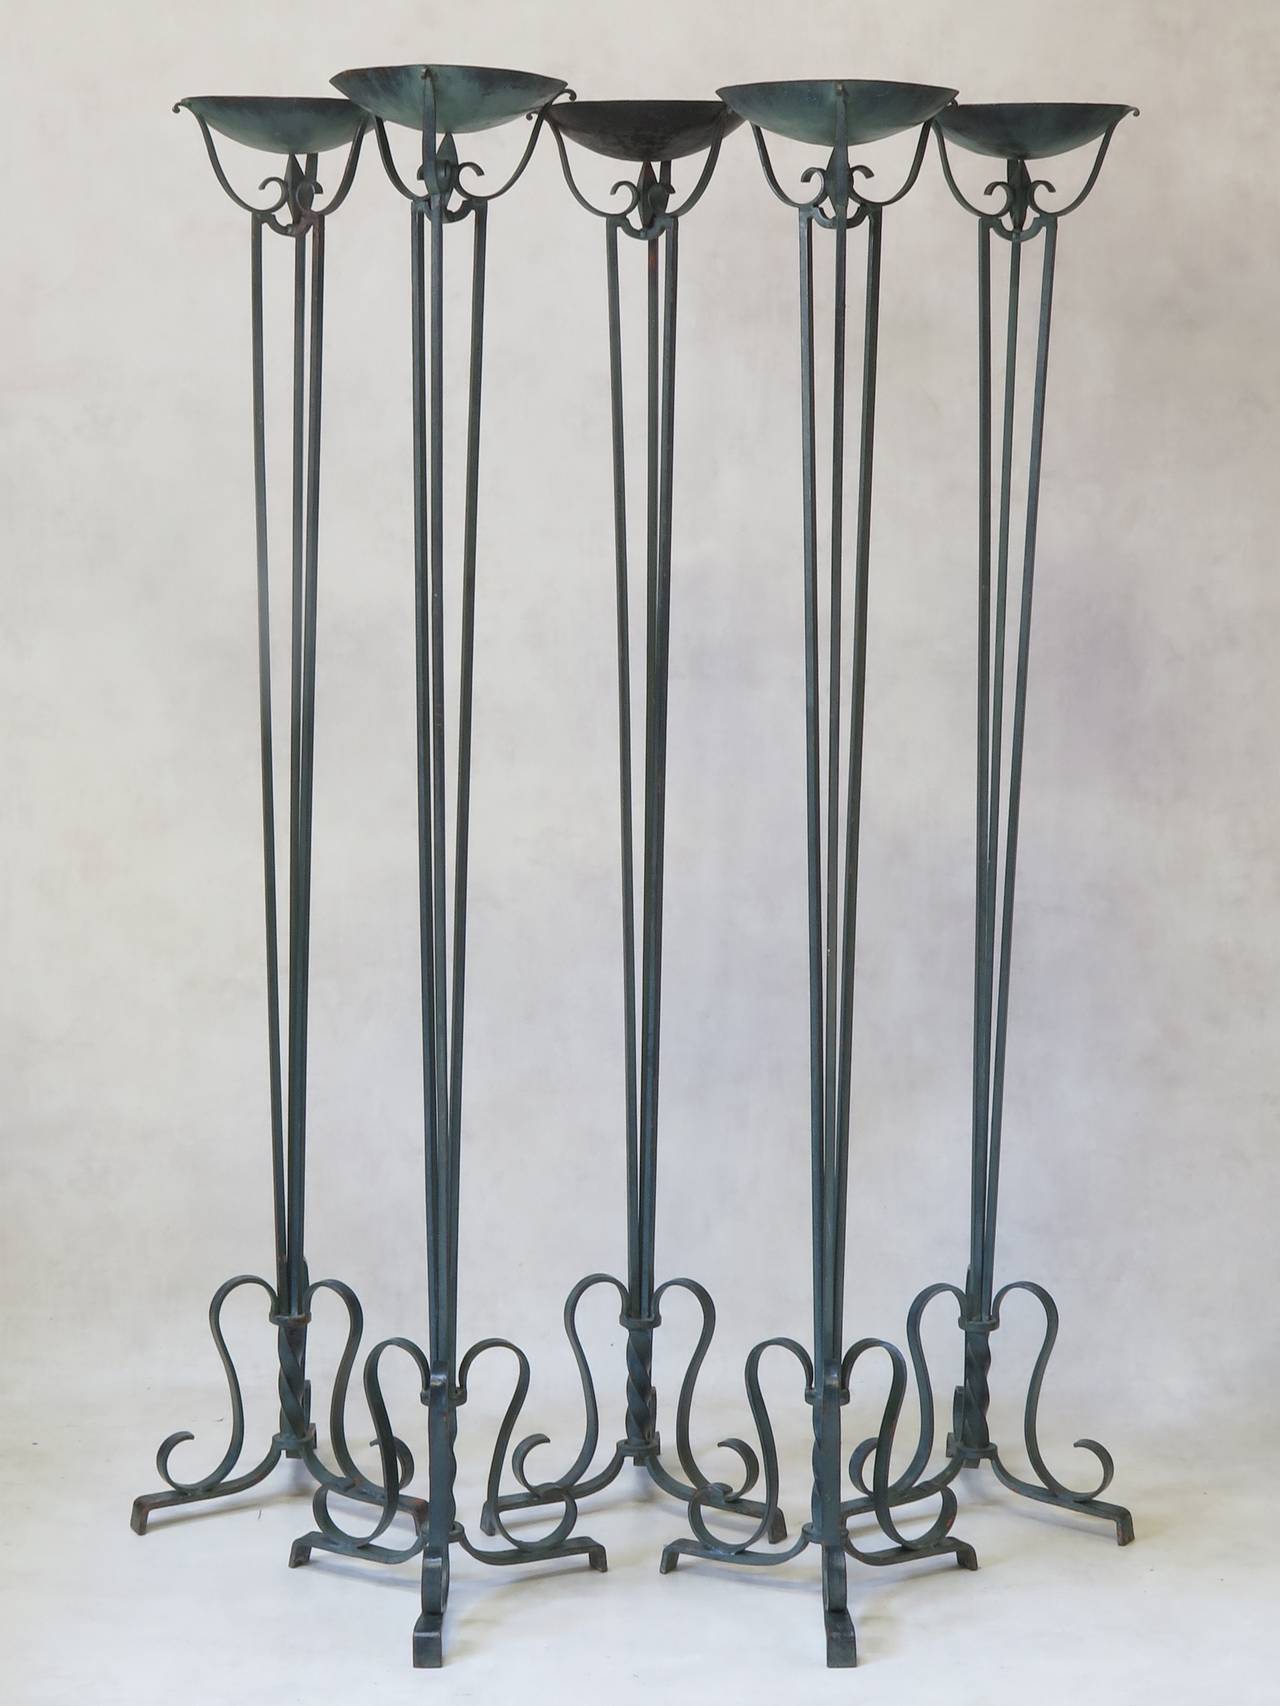 Elegant set of five French Art Deco neoclassical wrought iron torchères or candleholders.
The cupola is supported by a long tapering stem made up of three iron rods. Tripod base.
Bronze like verdigris paint finish, with orange primer visible